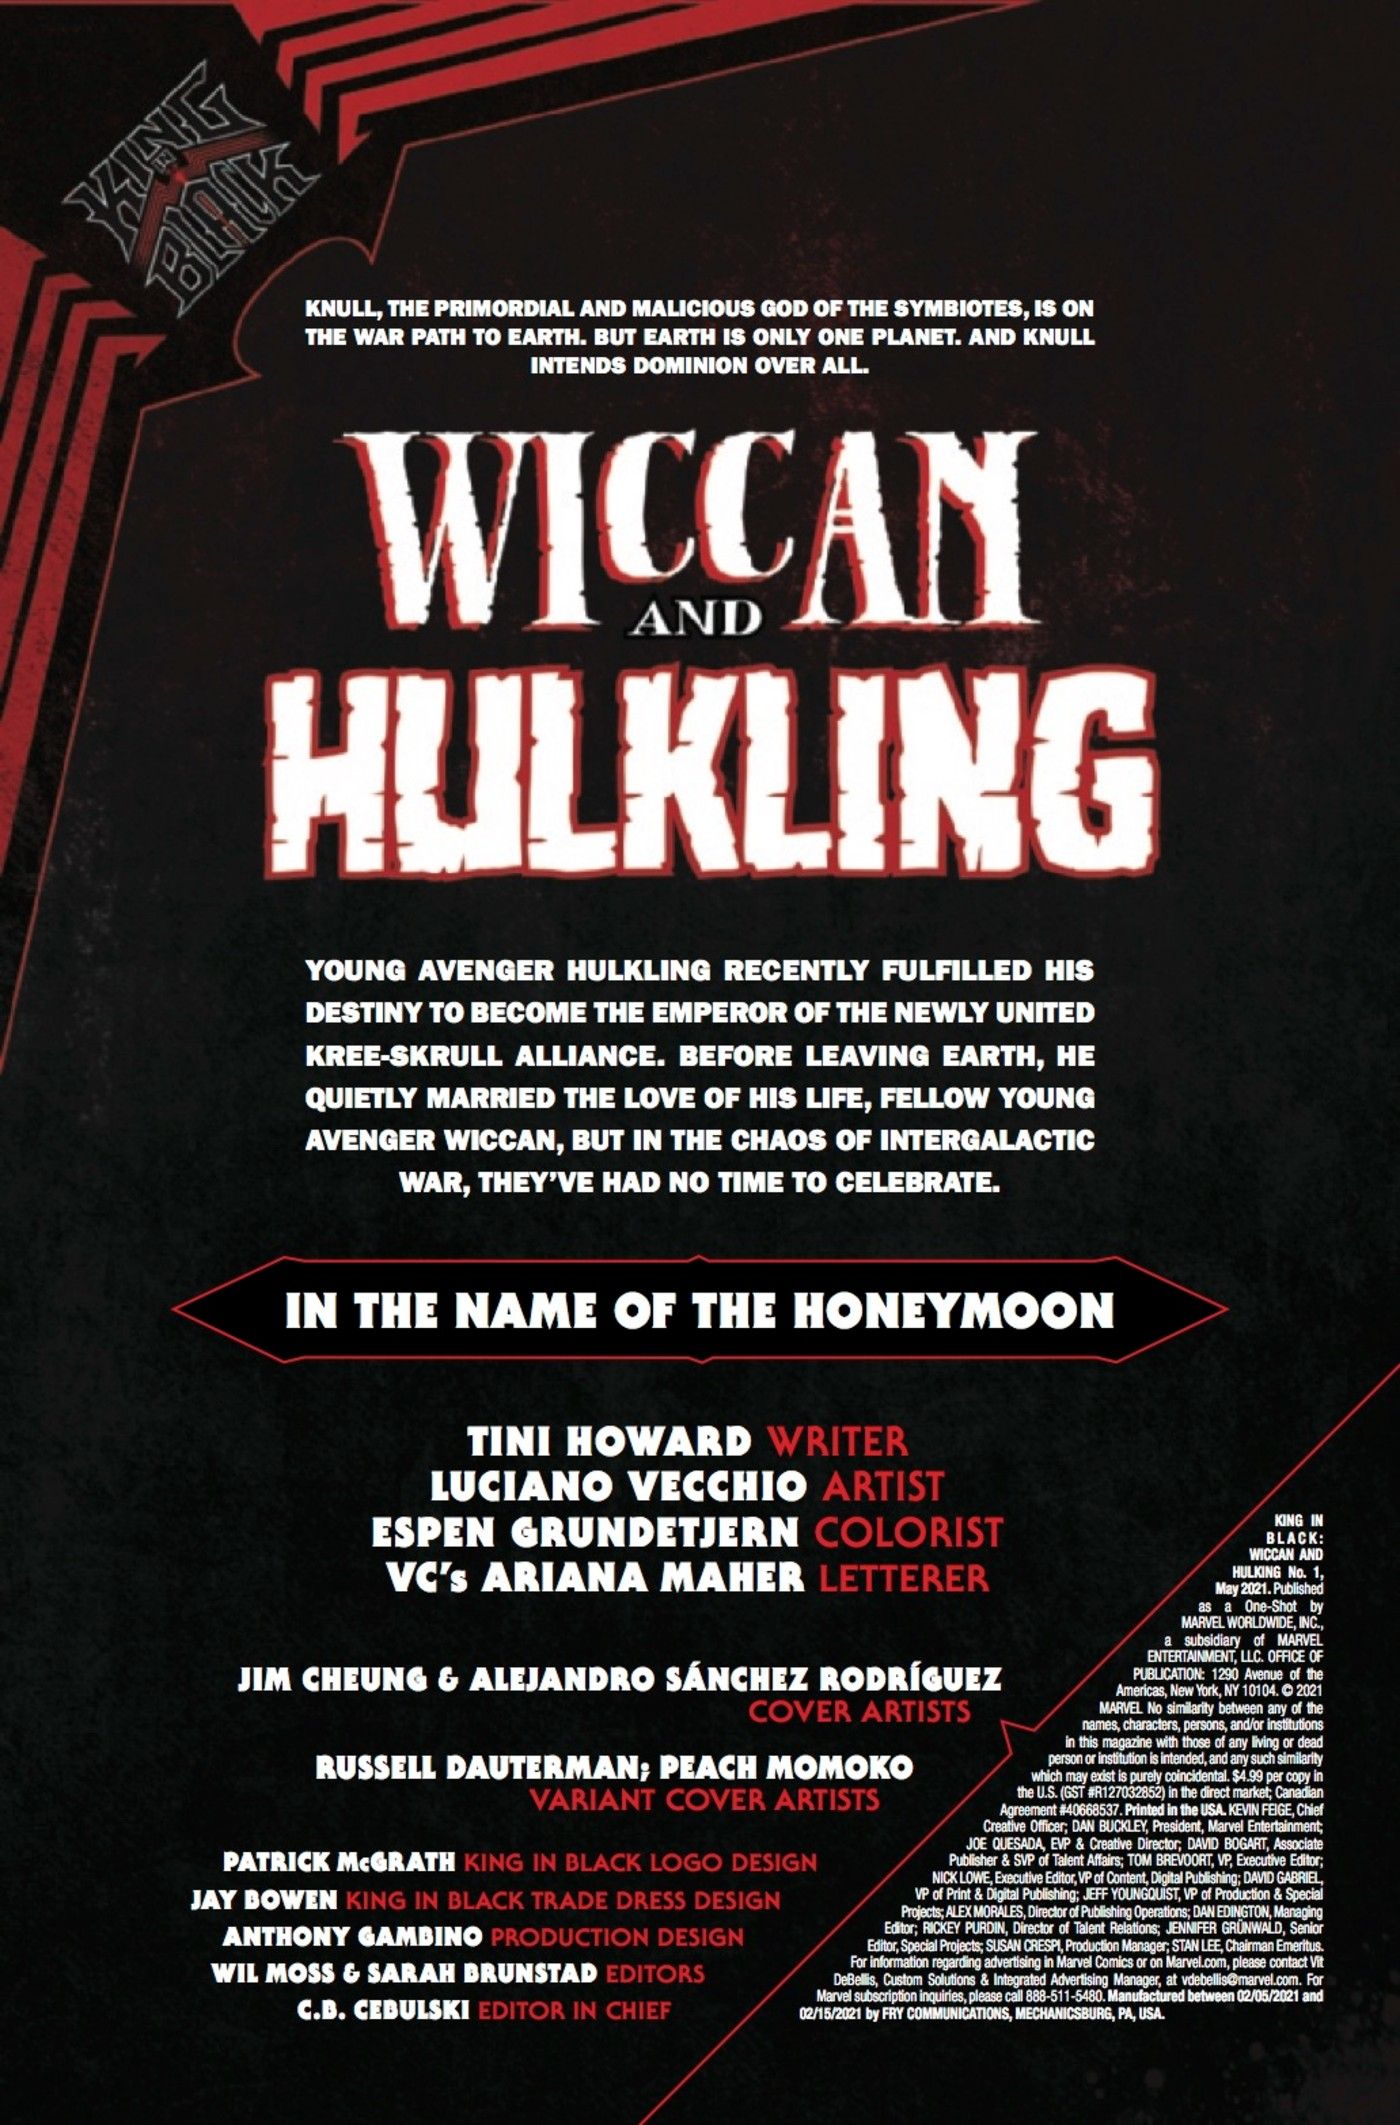 Wiccan Hulkling King in Black credits